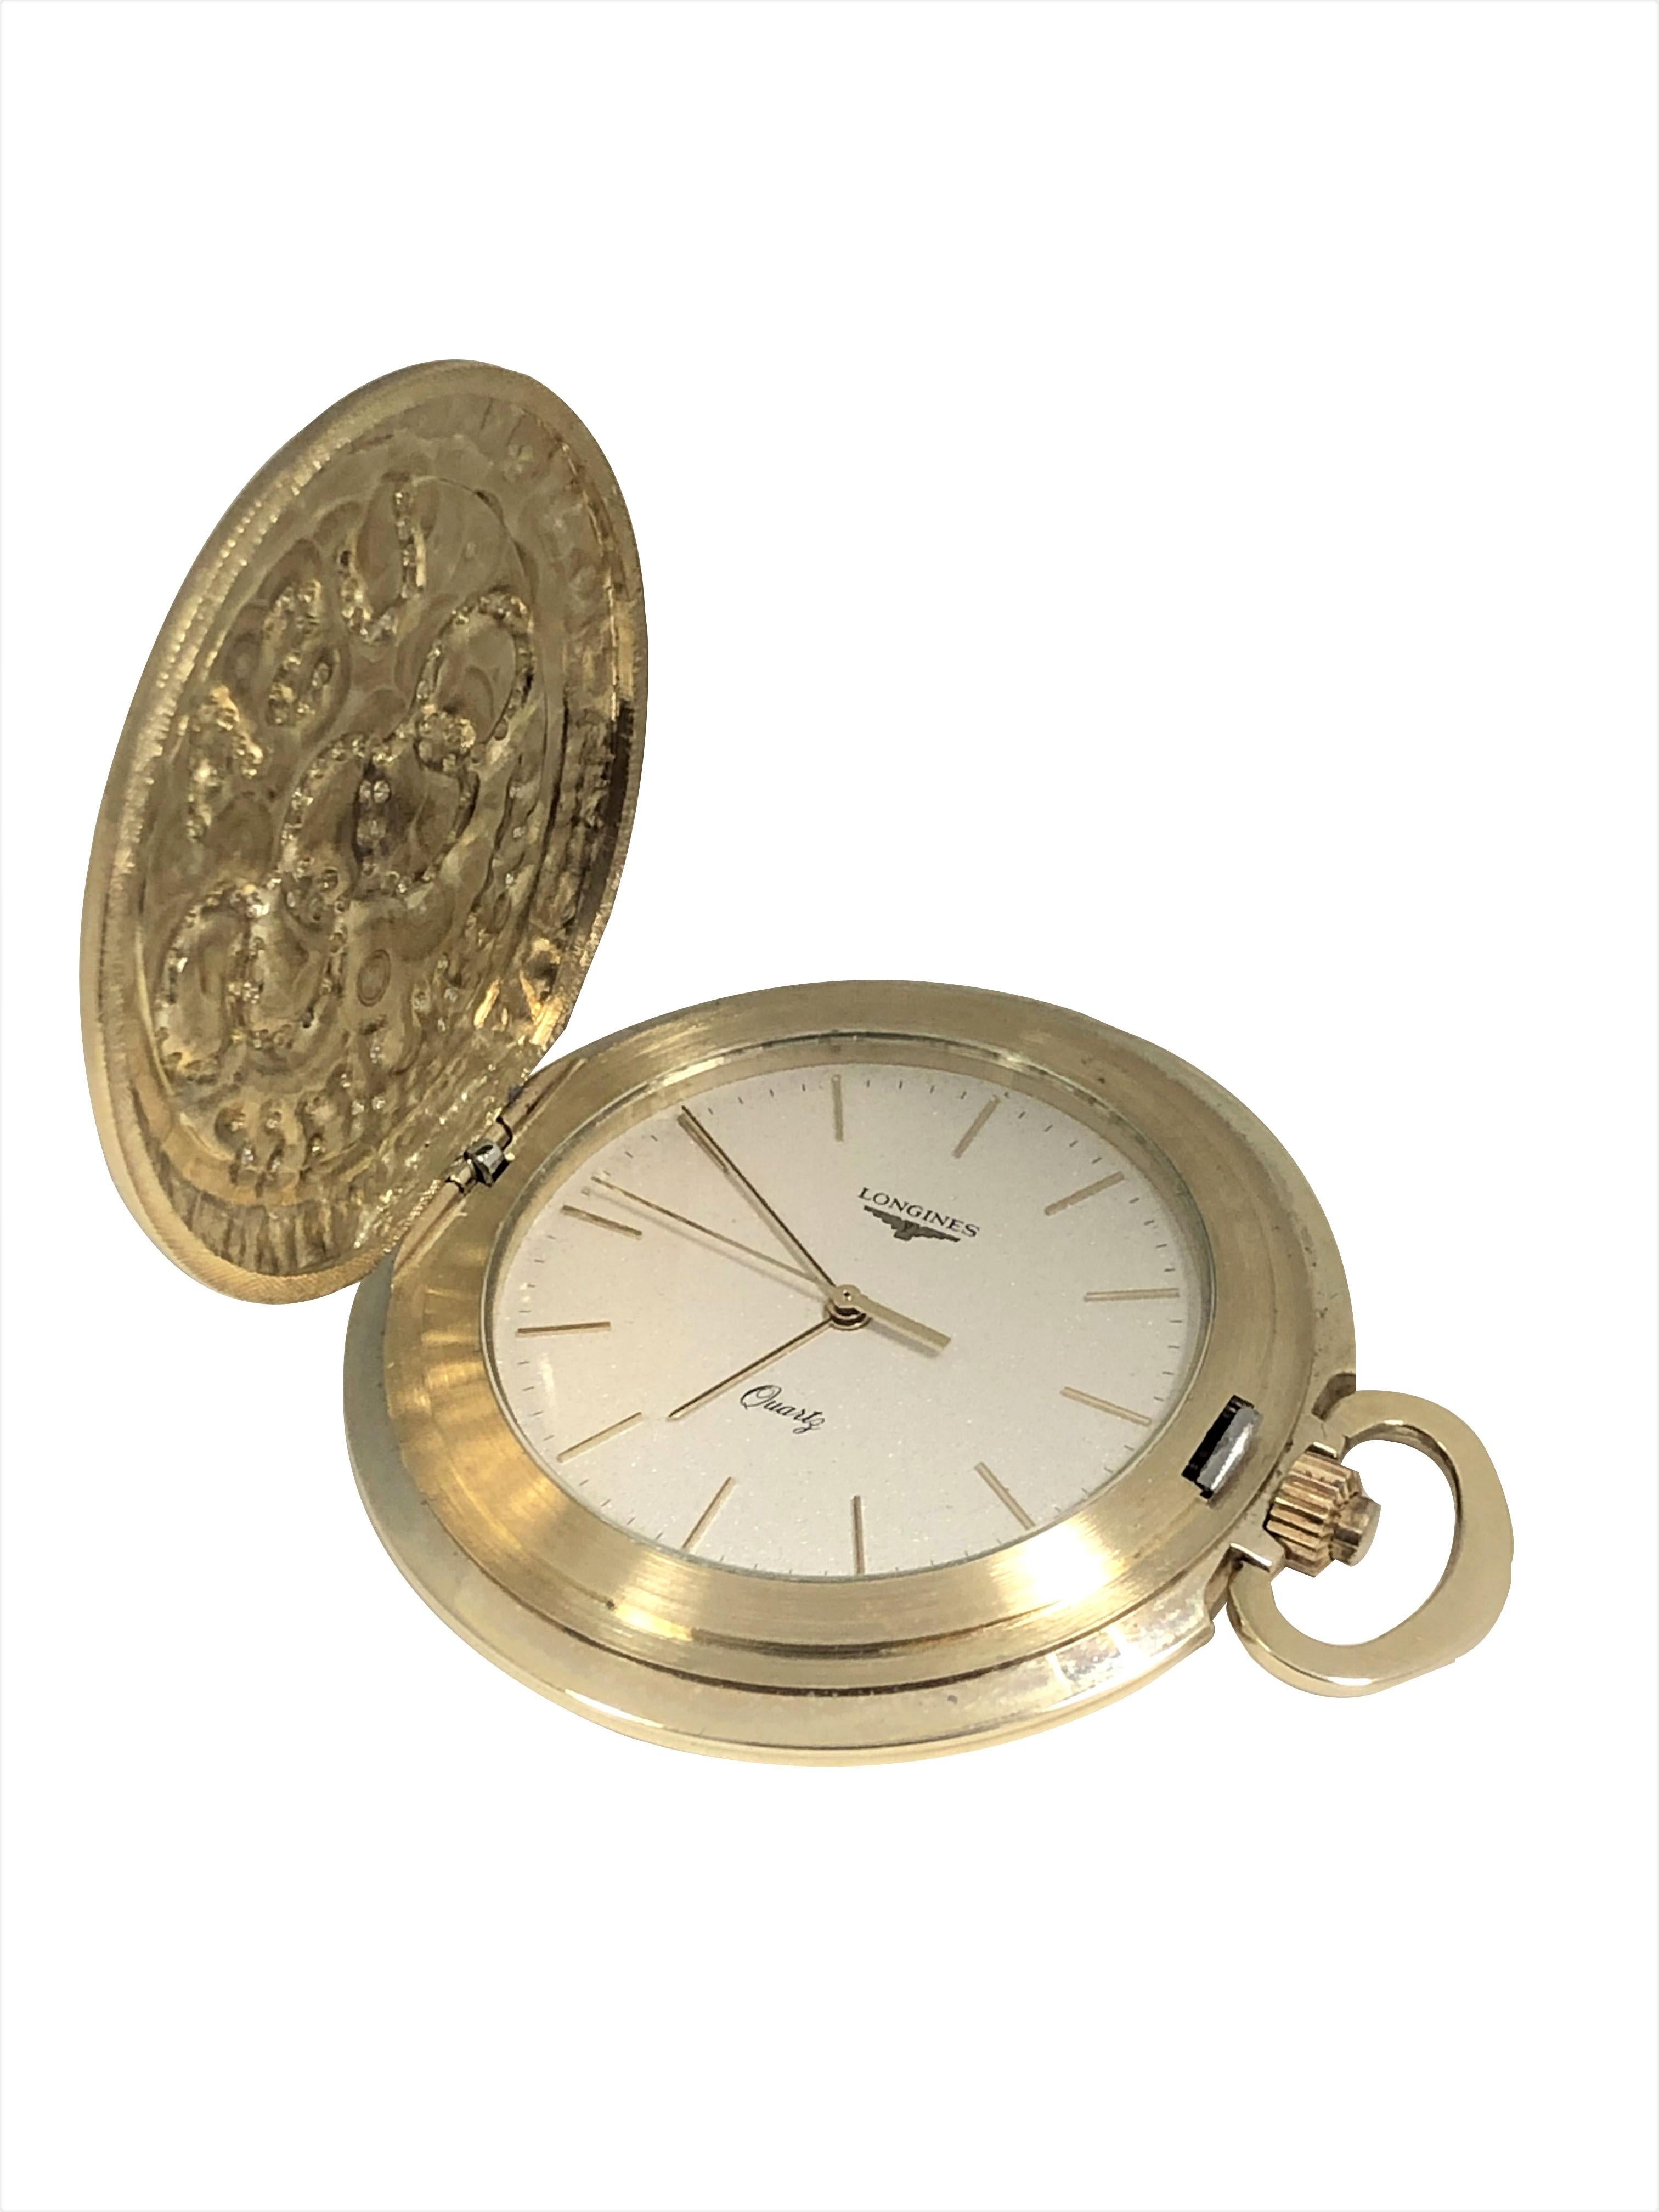 Circa 1984 Longines Commemorative Limited Edition Pocket Watch of the 1984 Los Angeles Olympics,  46 M.M. in Diameter and 8.5 M.M. thick 14K Yellow Gold Hunting covered Case. Quartz Movement, Silver and Gold speckled Dial with Raised Gold Baton